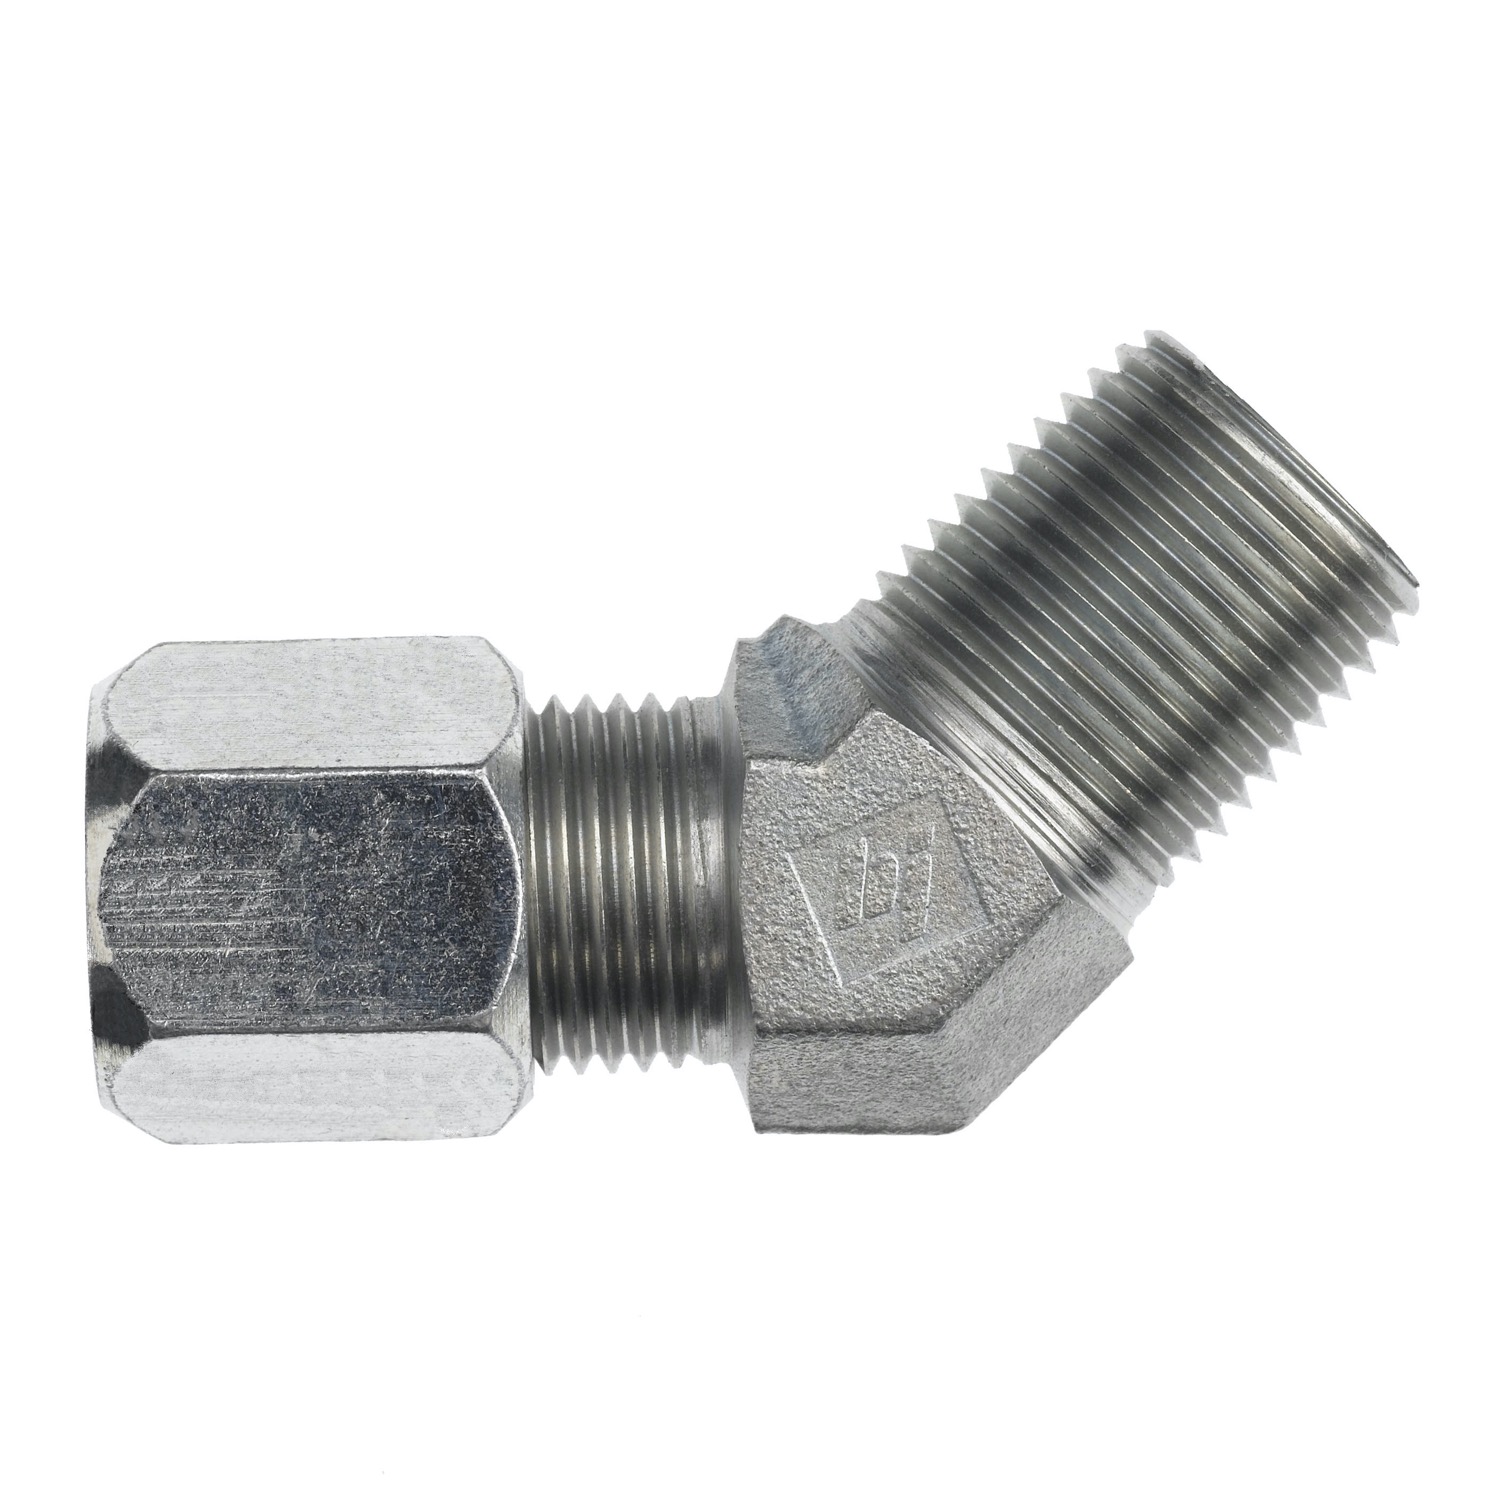 Hydraulic Hose Adapters - Elbow 45° Fitting, Flareless, Biting Type, C2503 Series